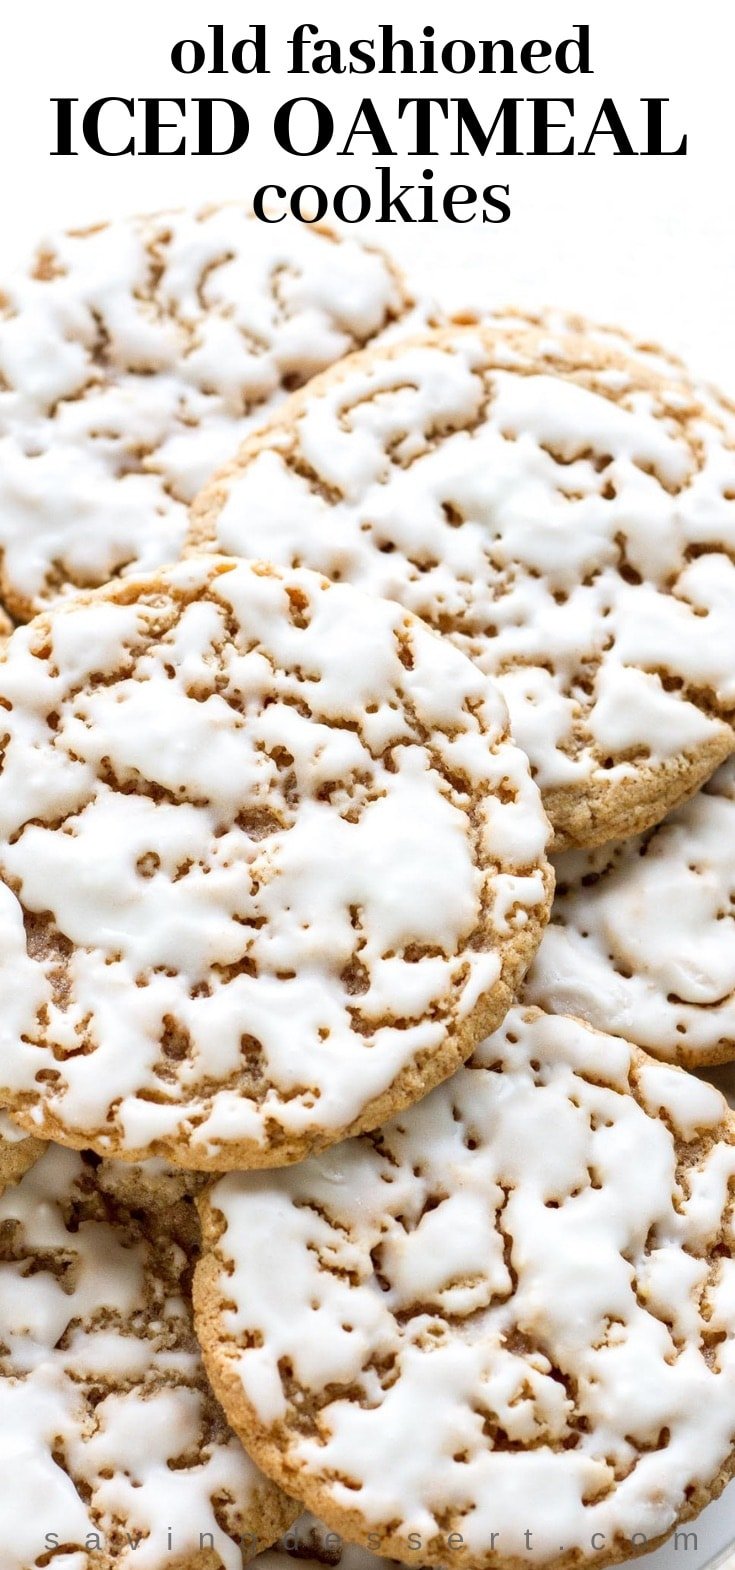 A stack of Oatmeal Cookies with icing on top